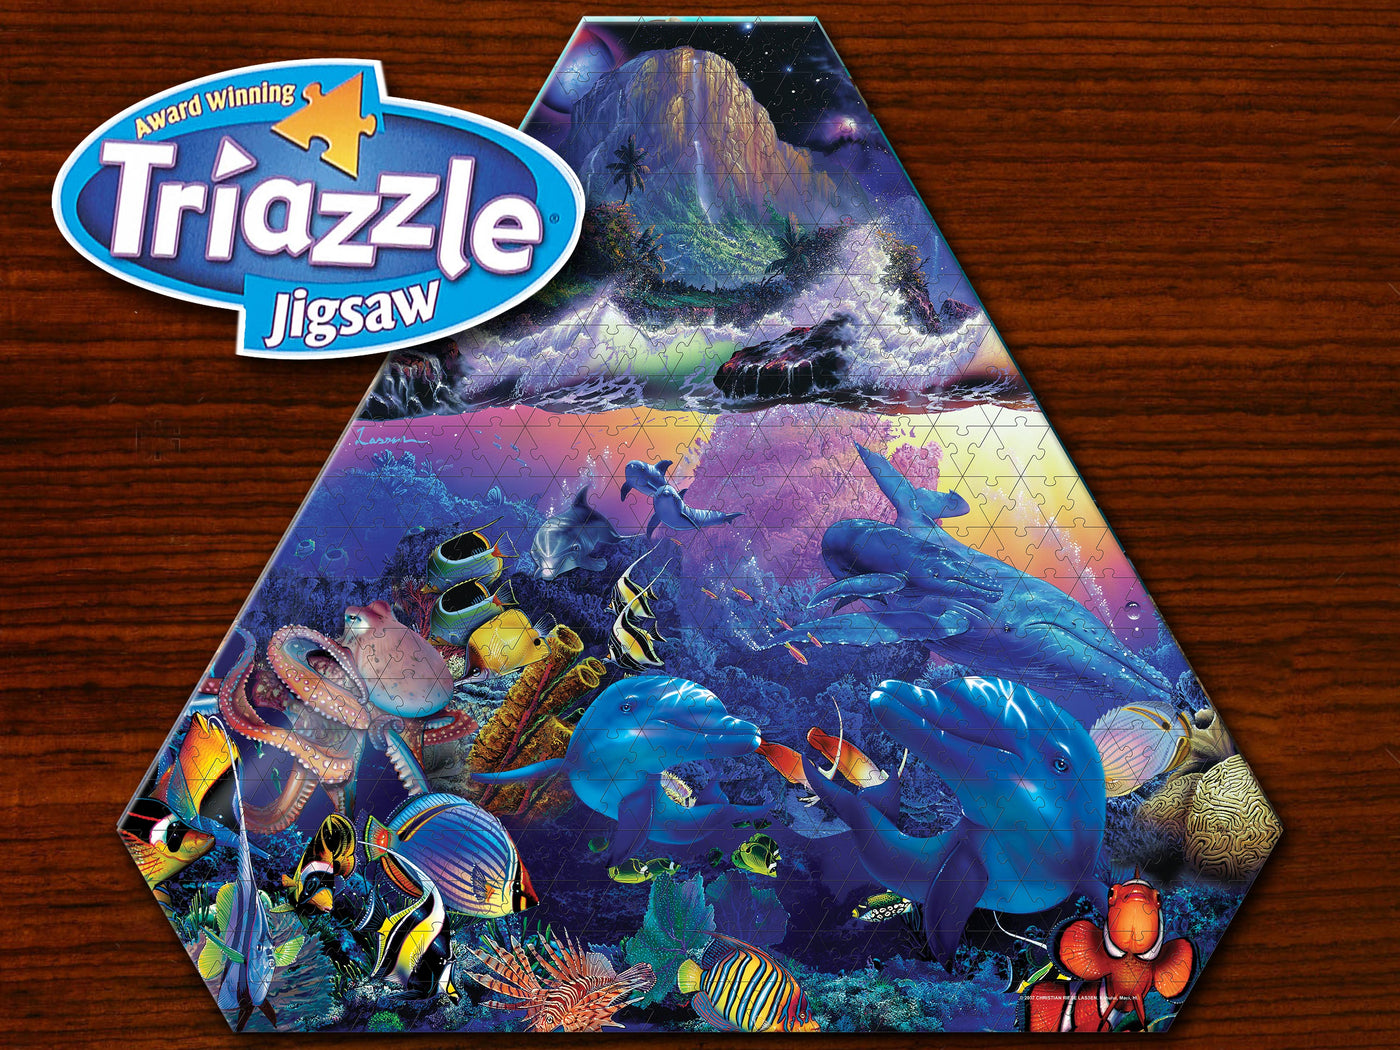 Triazzle Jigsaw - Rare Collectible puzzle - Cosmic Reef (NOT in Tray - Boxed puzzle) by Dan Gilbert